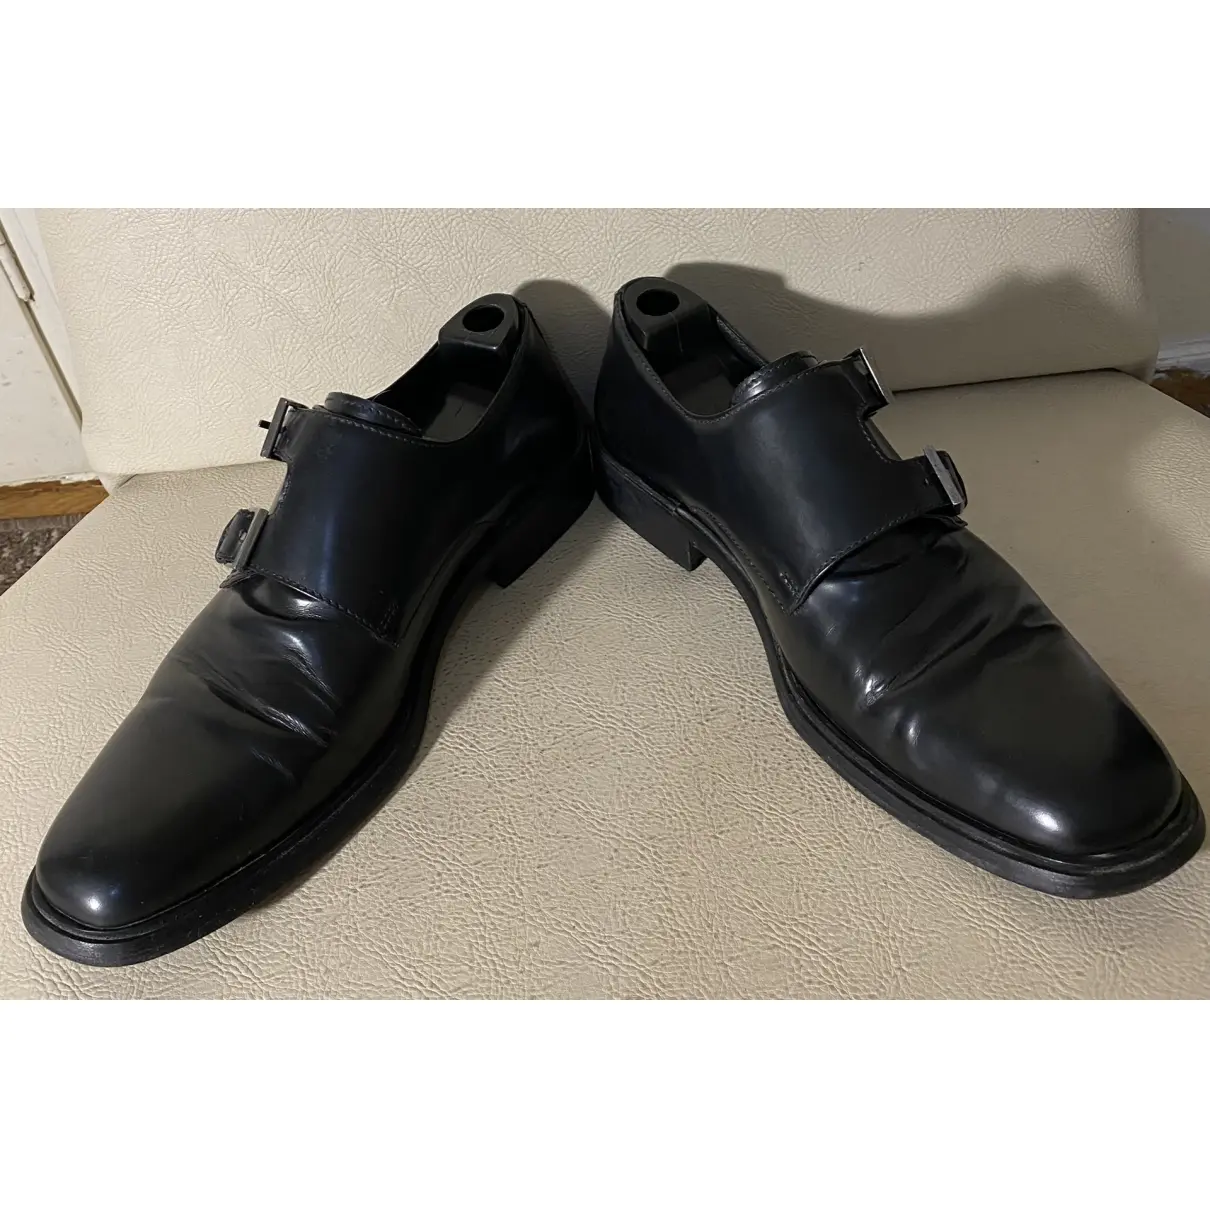 Buy Gucci Patent leather flats online